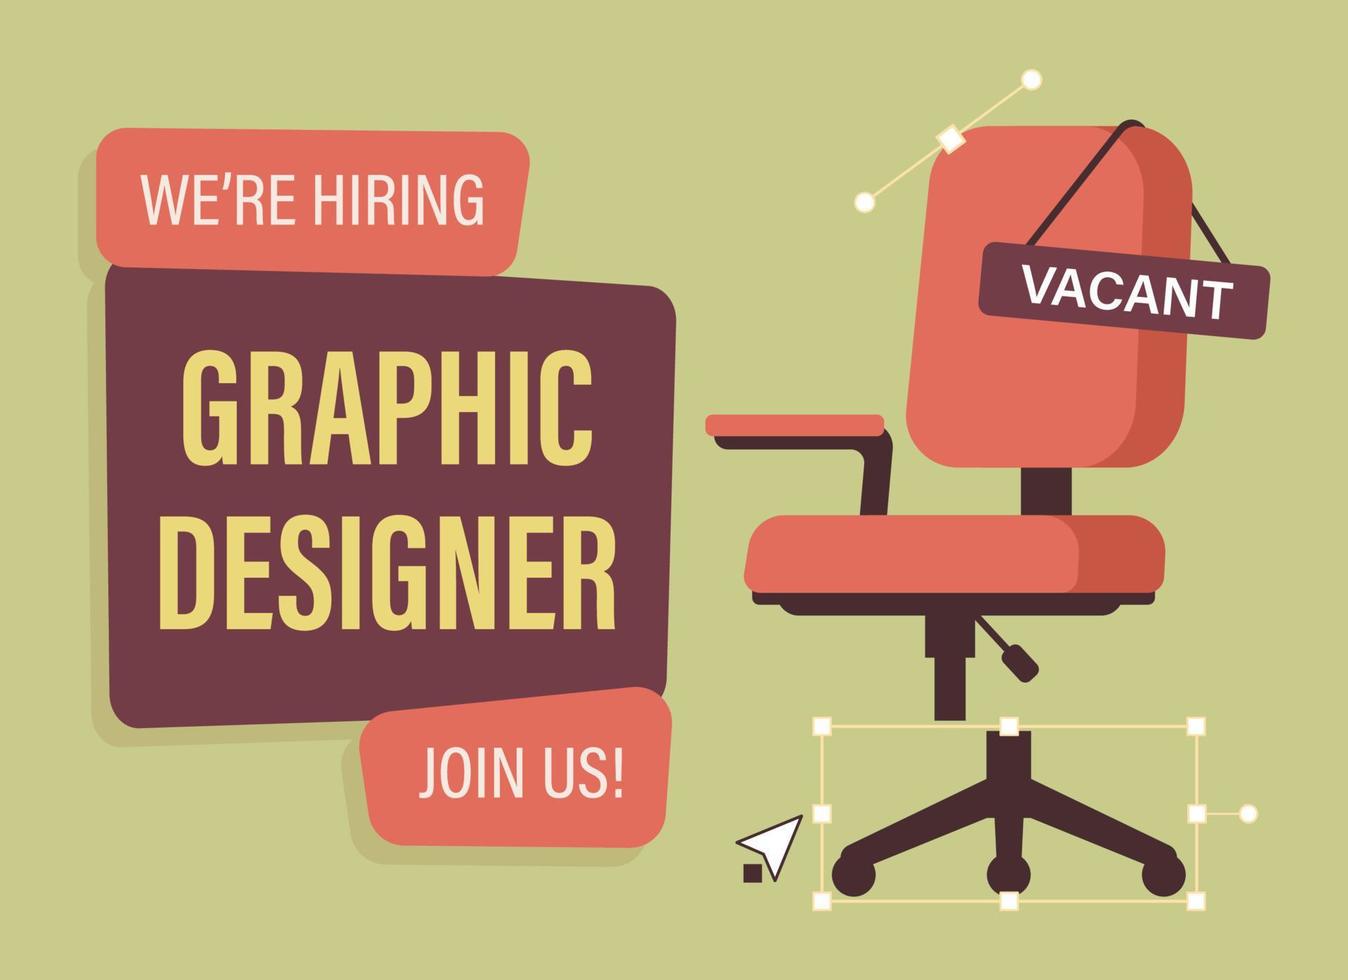 We are hiring graphic designer with empty chair illustration vector